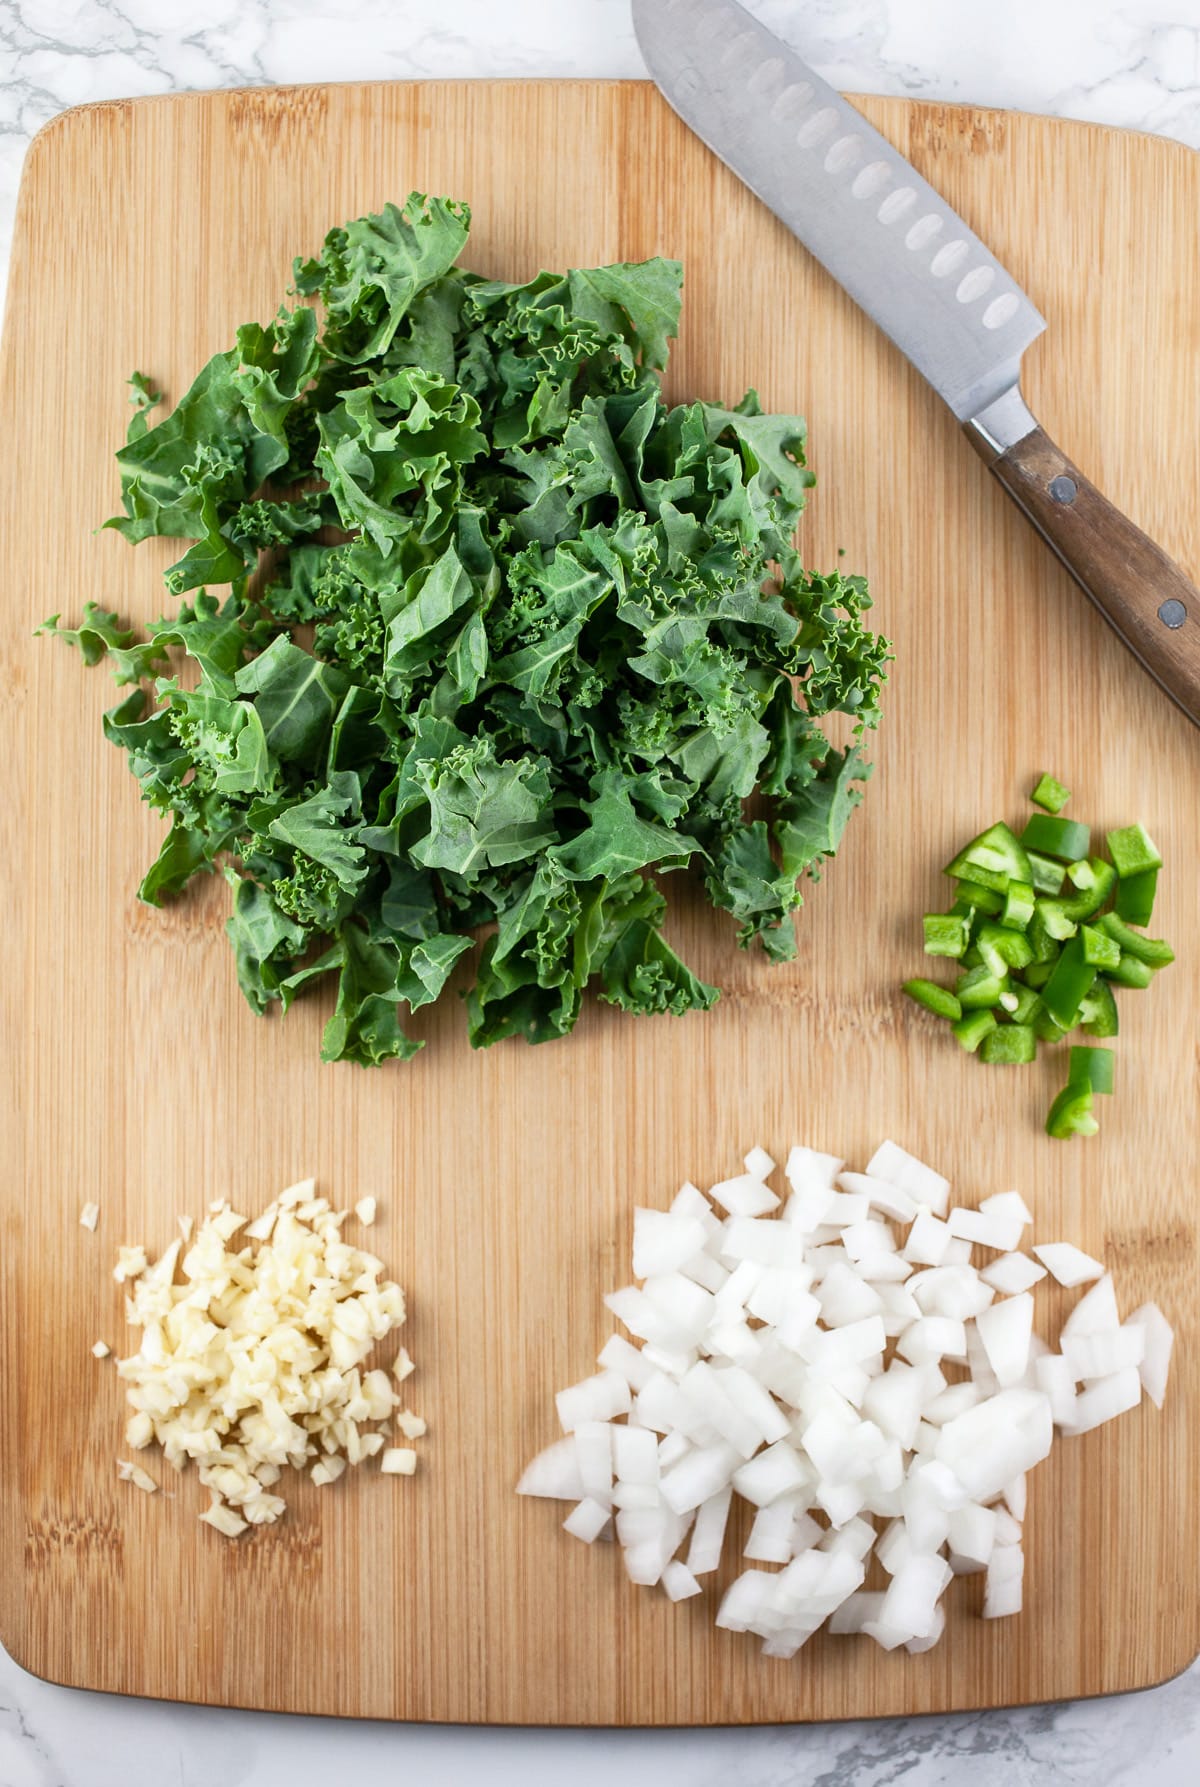 Minced garlic, onion, and jalapeno pepper and chopped kale on wooden cutting board with knife.